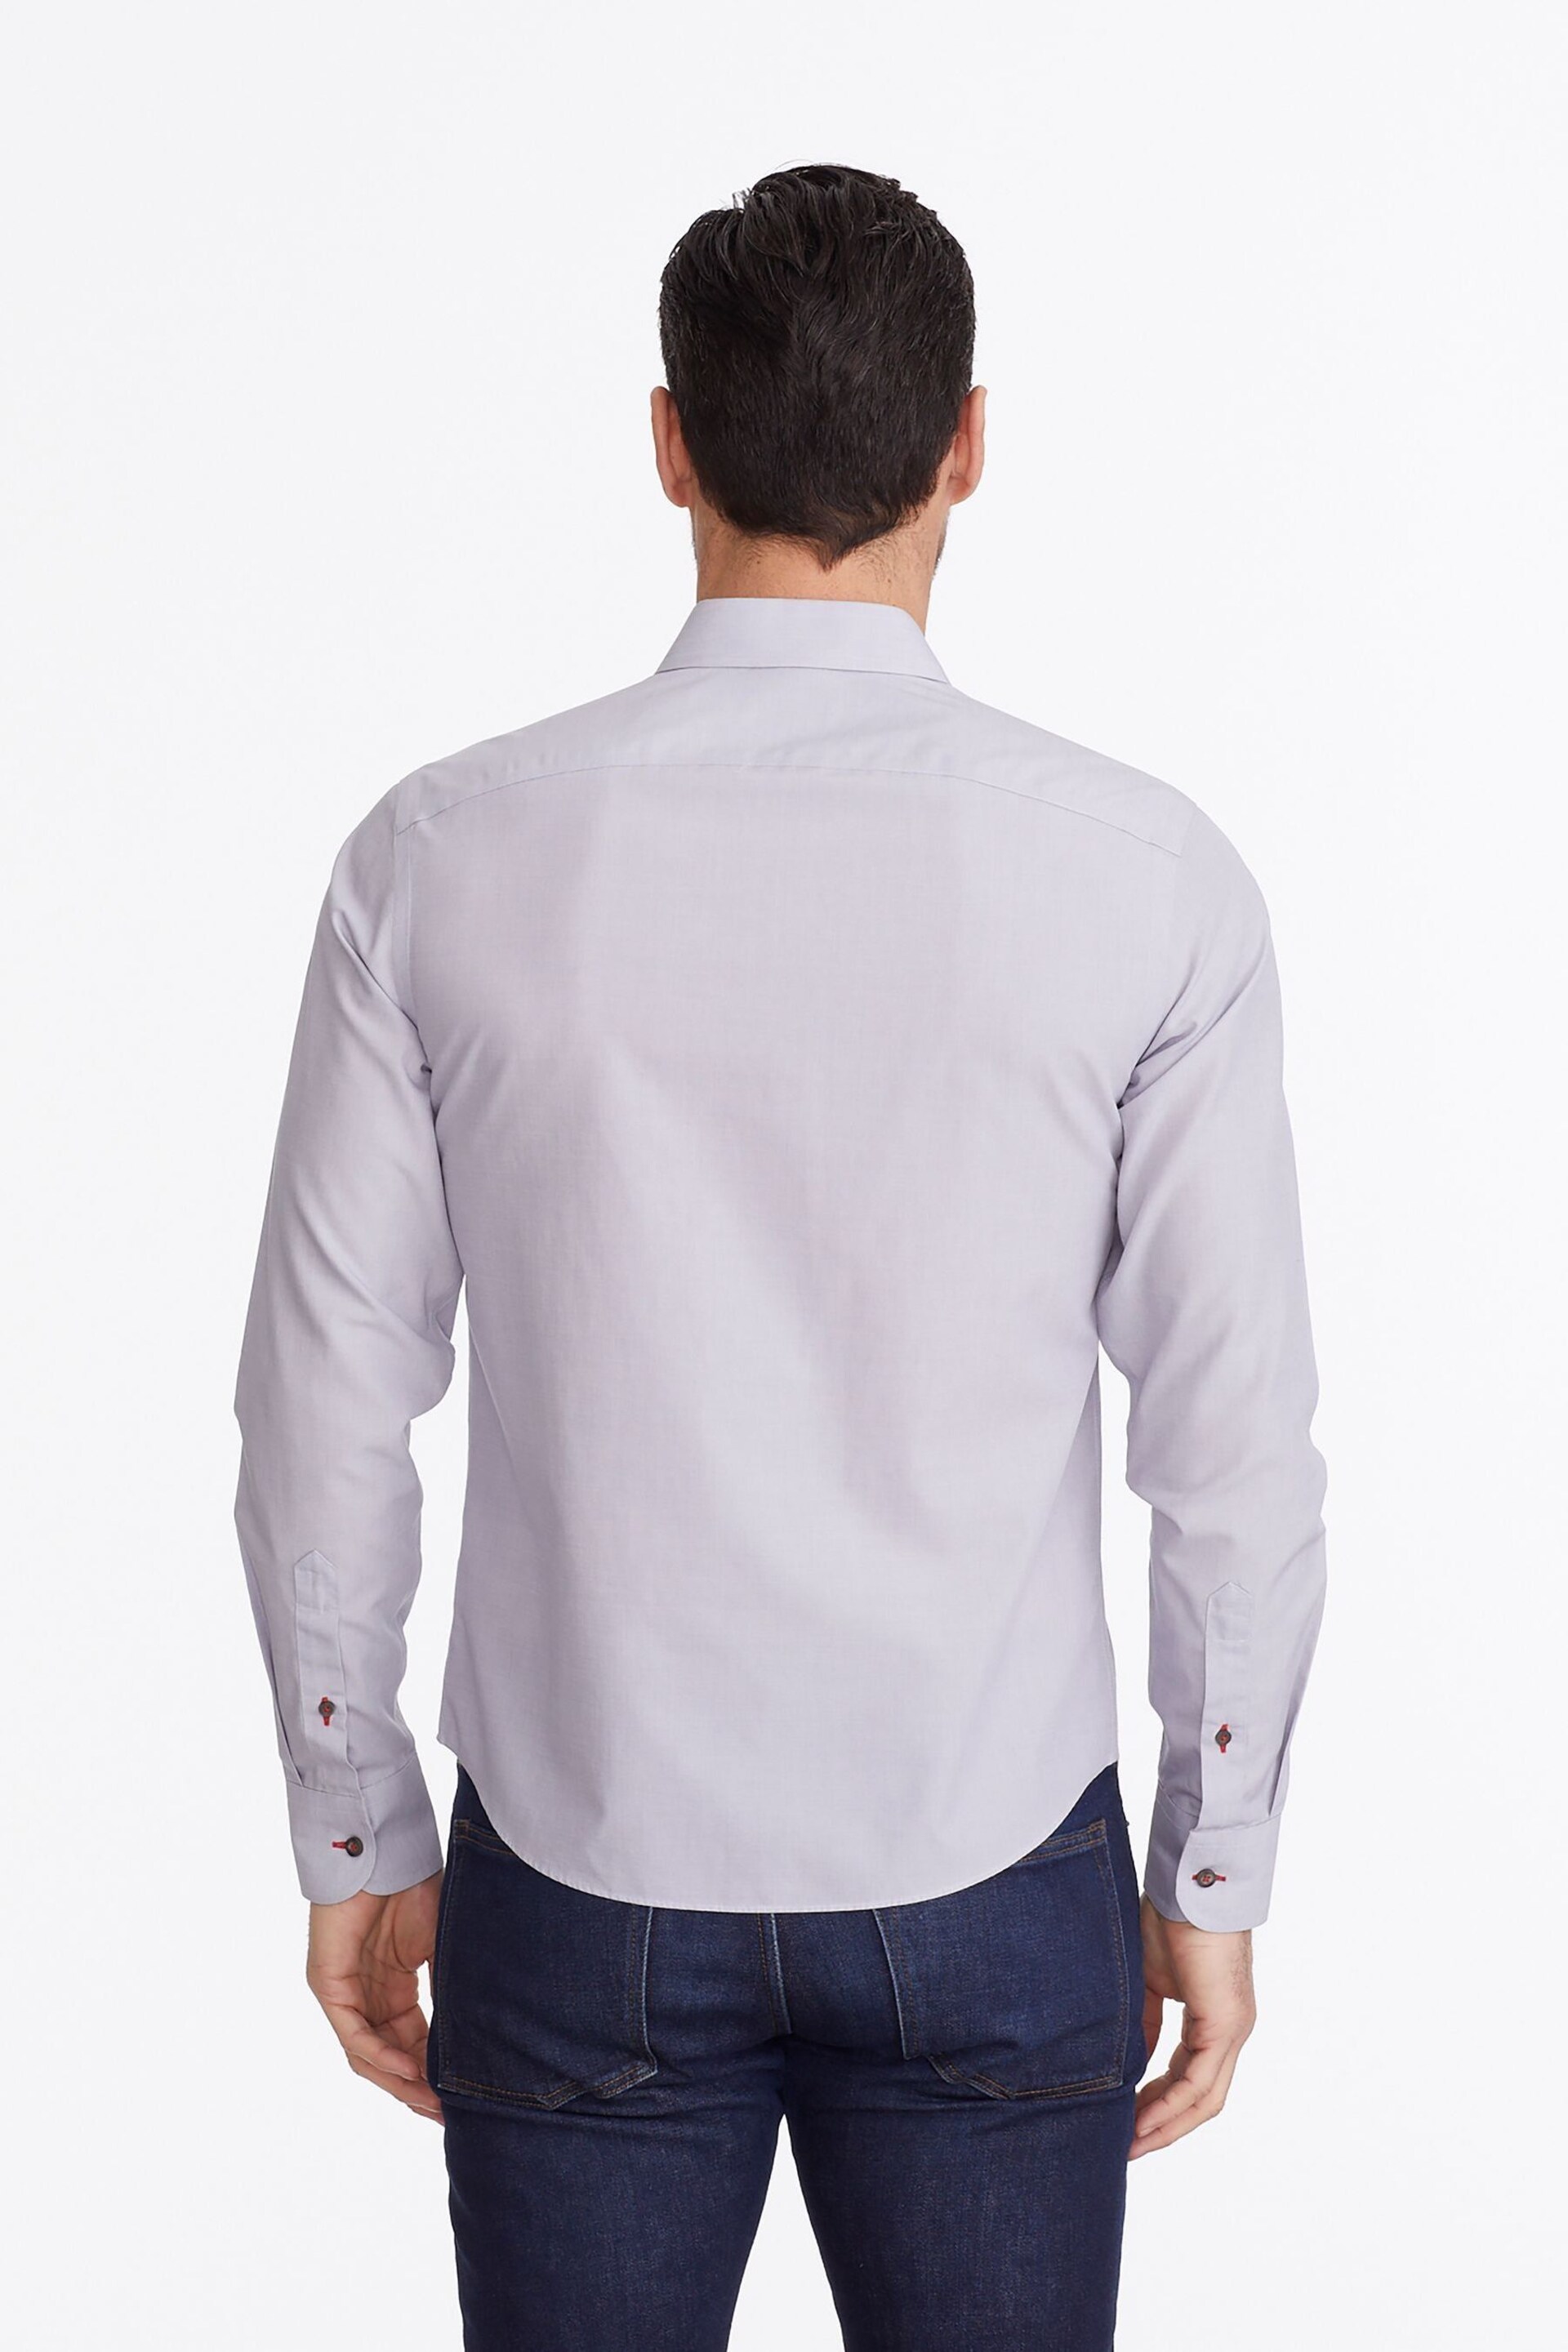 UNTUCKit Grey Light Wrinkle-Free Relaxed Fit Rubican Shirt - Image 2 of 6